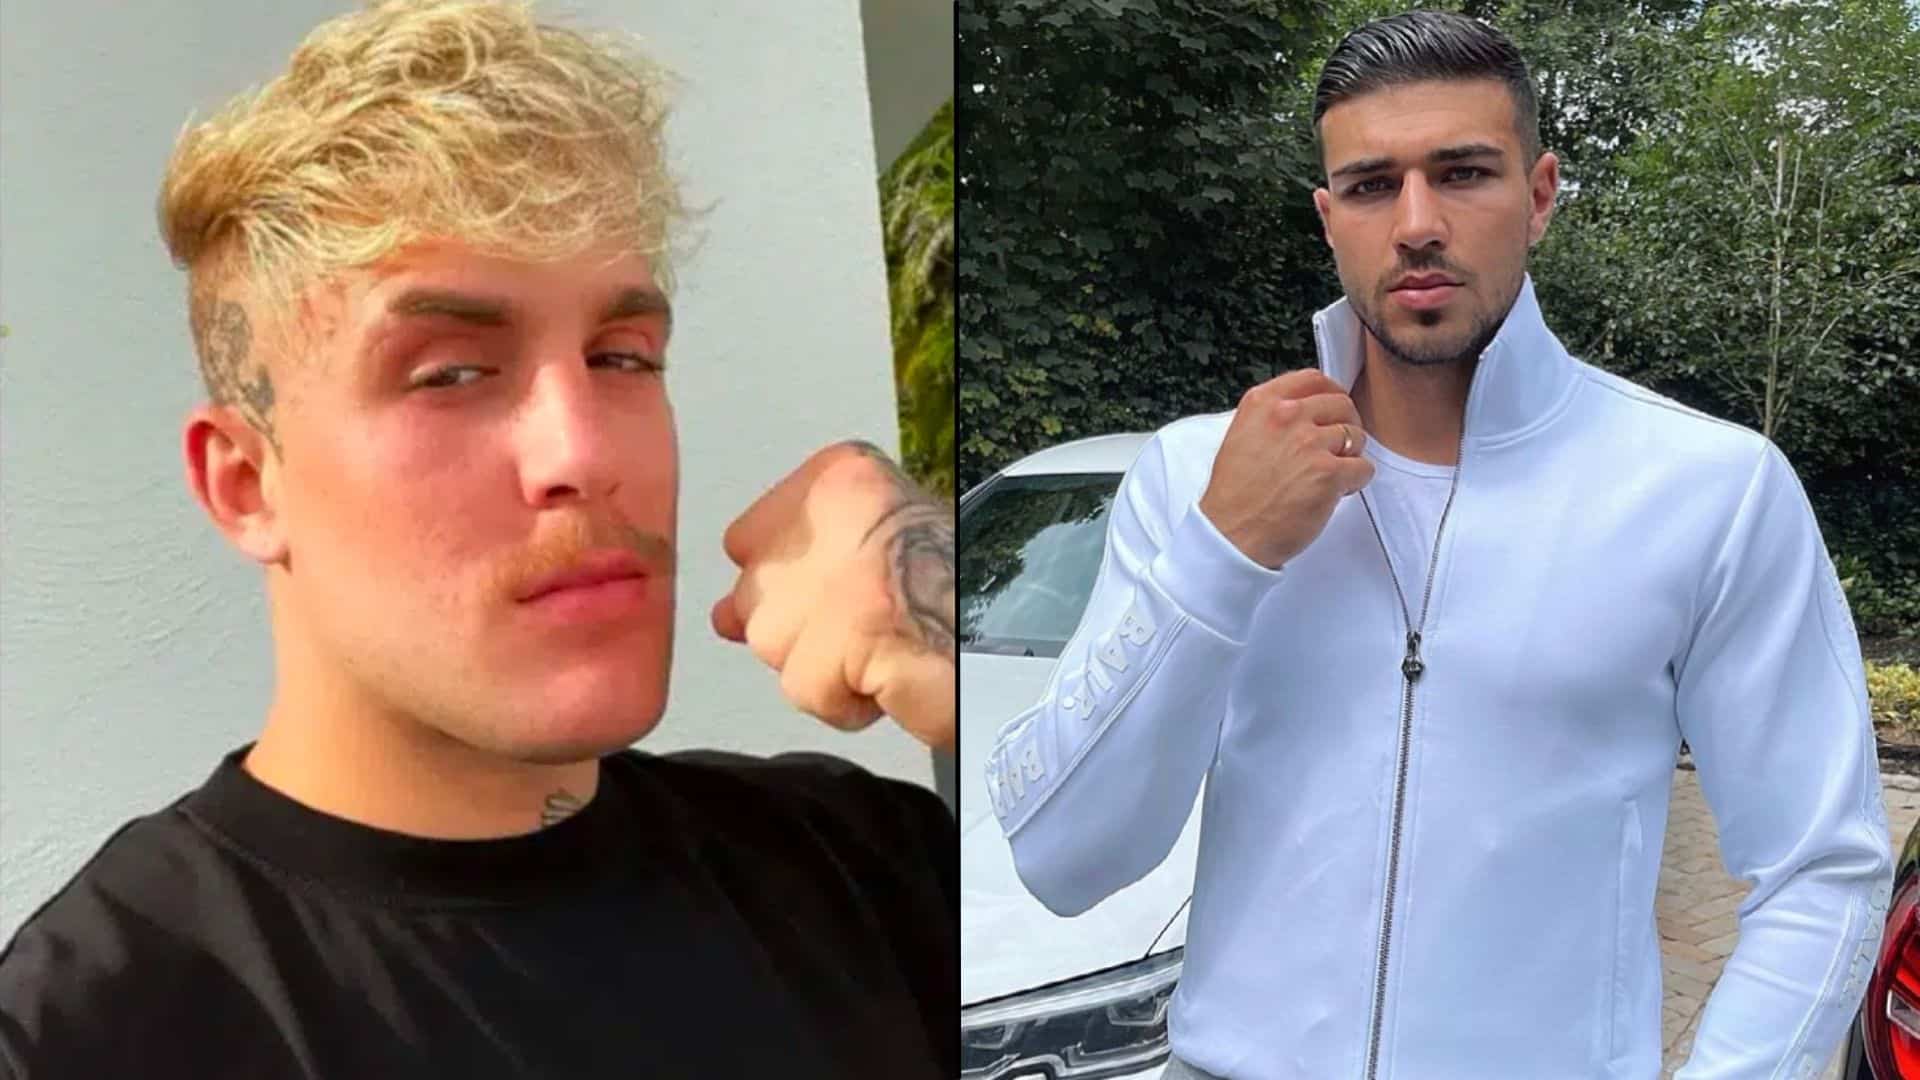 Jake Paul and Tommy Fury side-by-side making fists